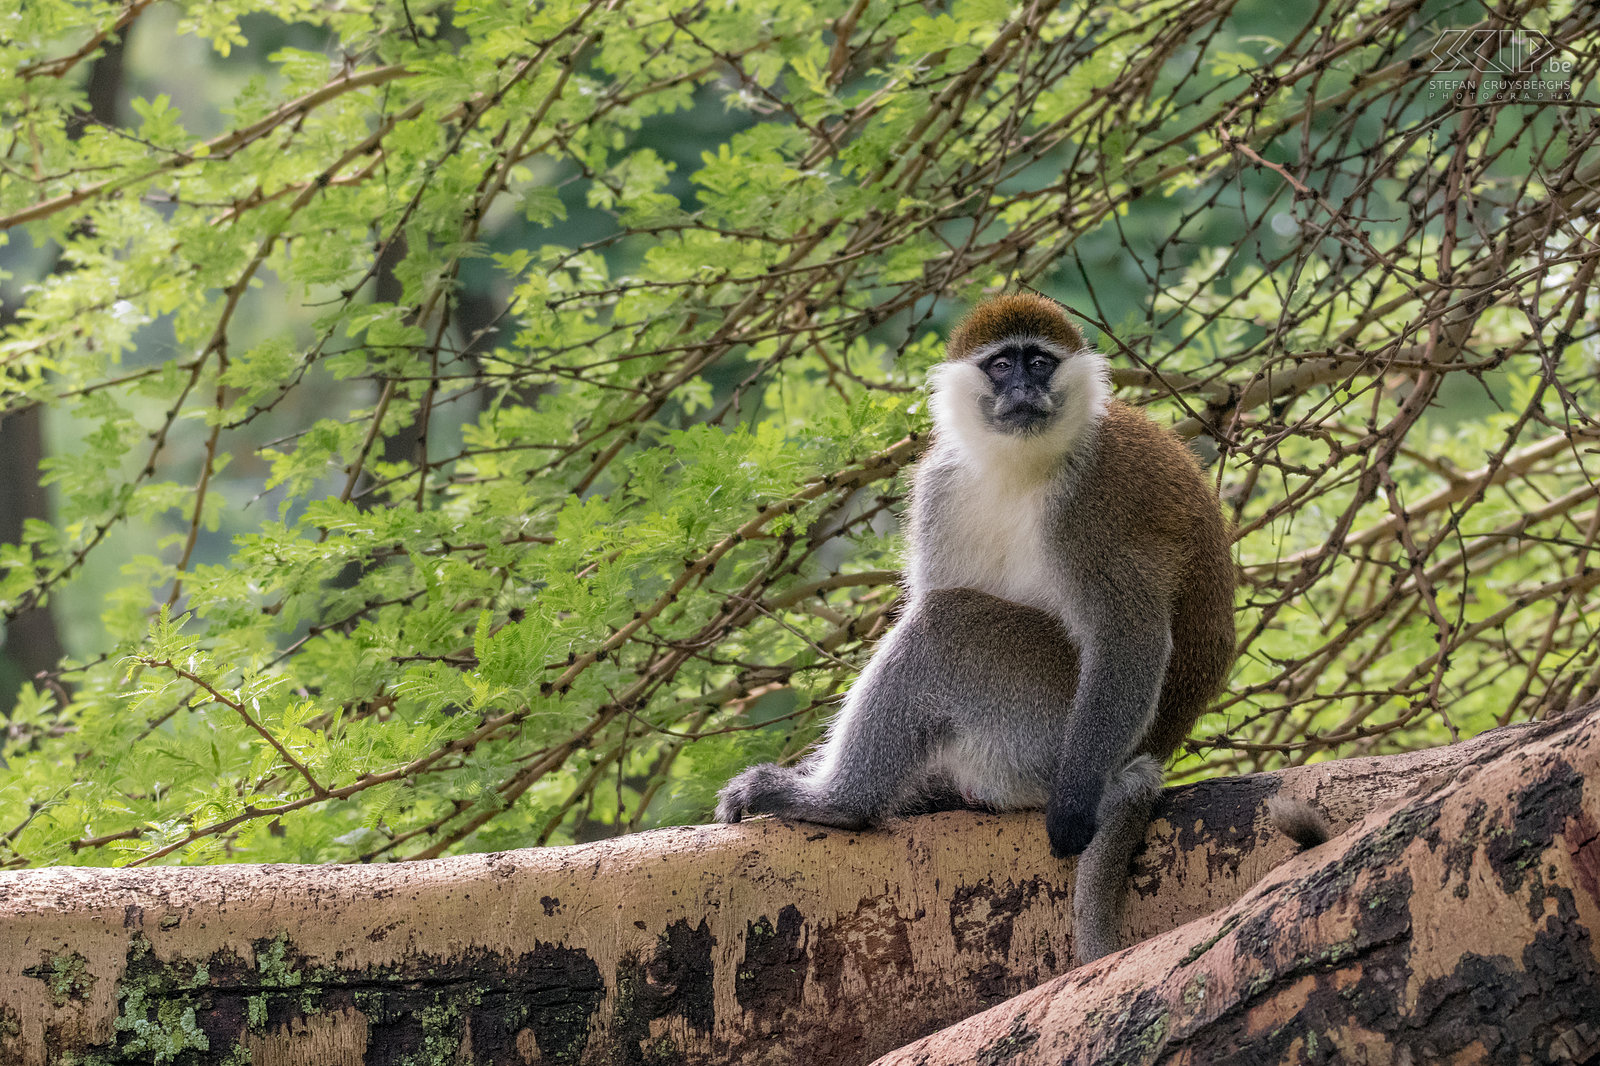 Lake Awassa - Grivet The Grivet (Chlorocebus aethiops) is a species of monkeys that only lives in Sudan, Ethiopia and Eritrea. He is mainly dependent on the Acacia. Stefan Cruysberghs